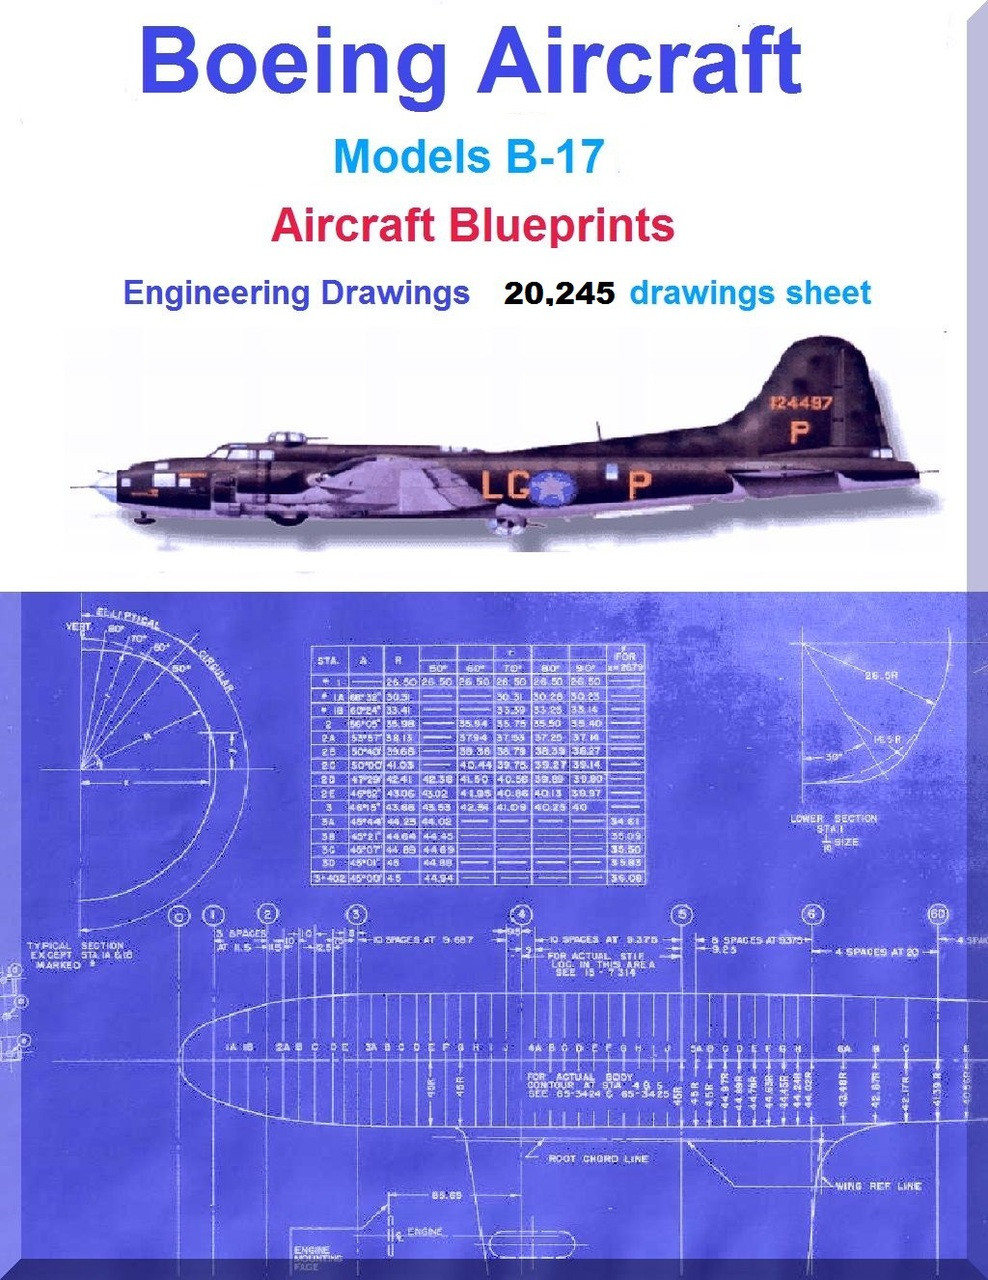 Boeing B 17 Airplane Aircraft Engineering Drawings Blueprints Dvds Aircraft Reports Aircraft Manuals Aircraft Helicopter Engines Propellers Blueprints Publications